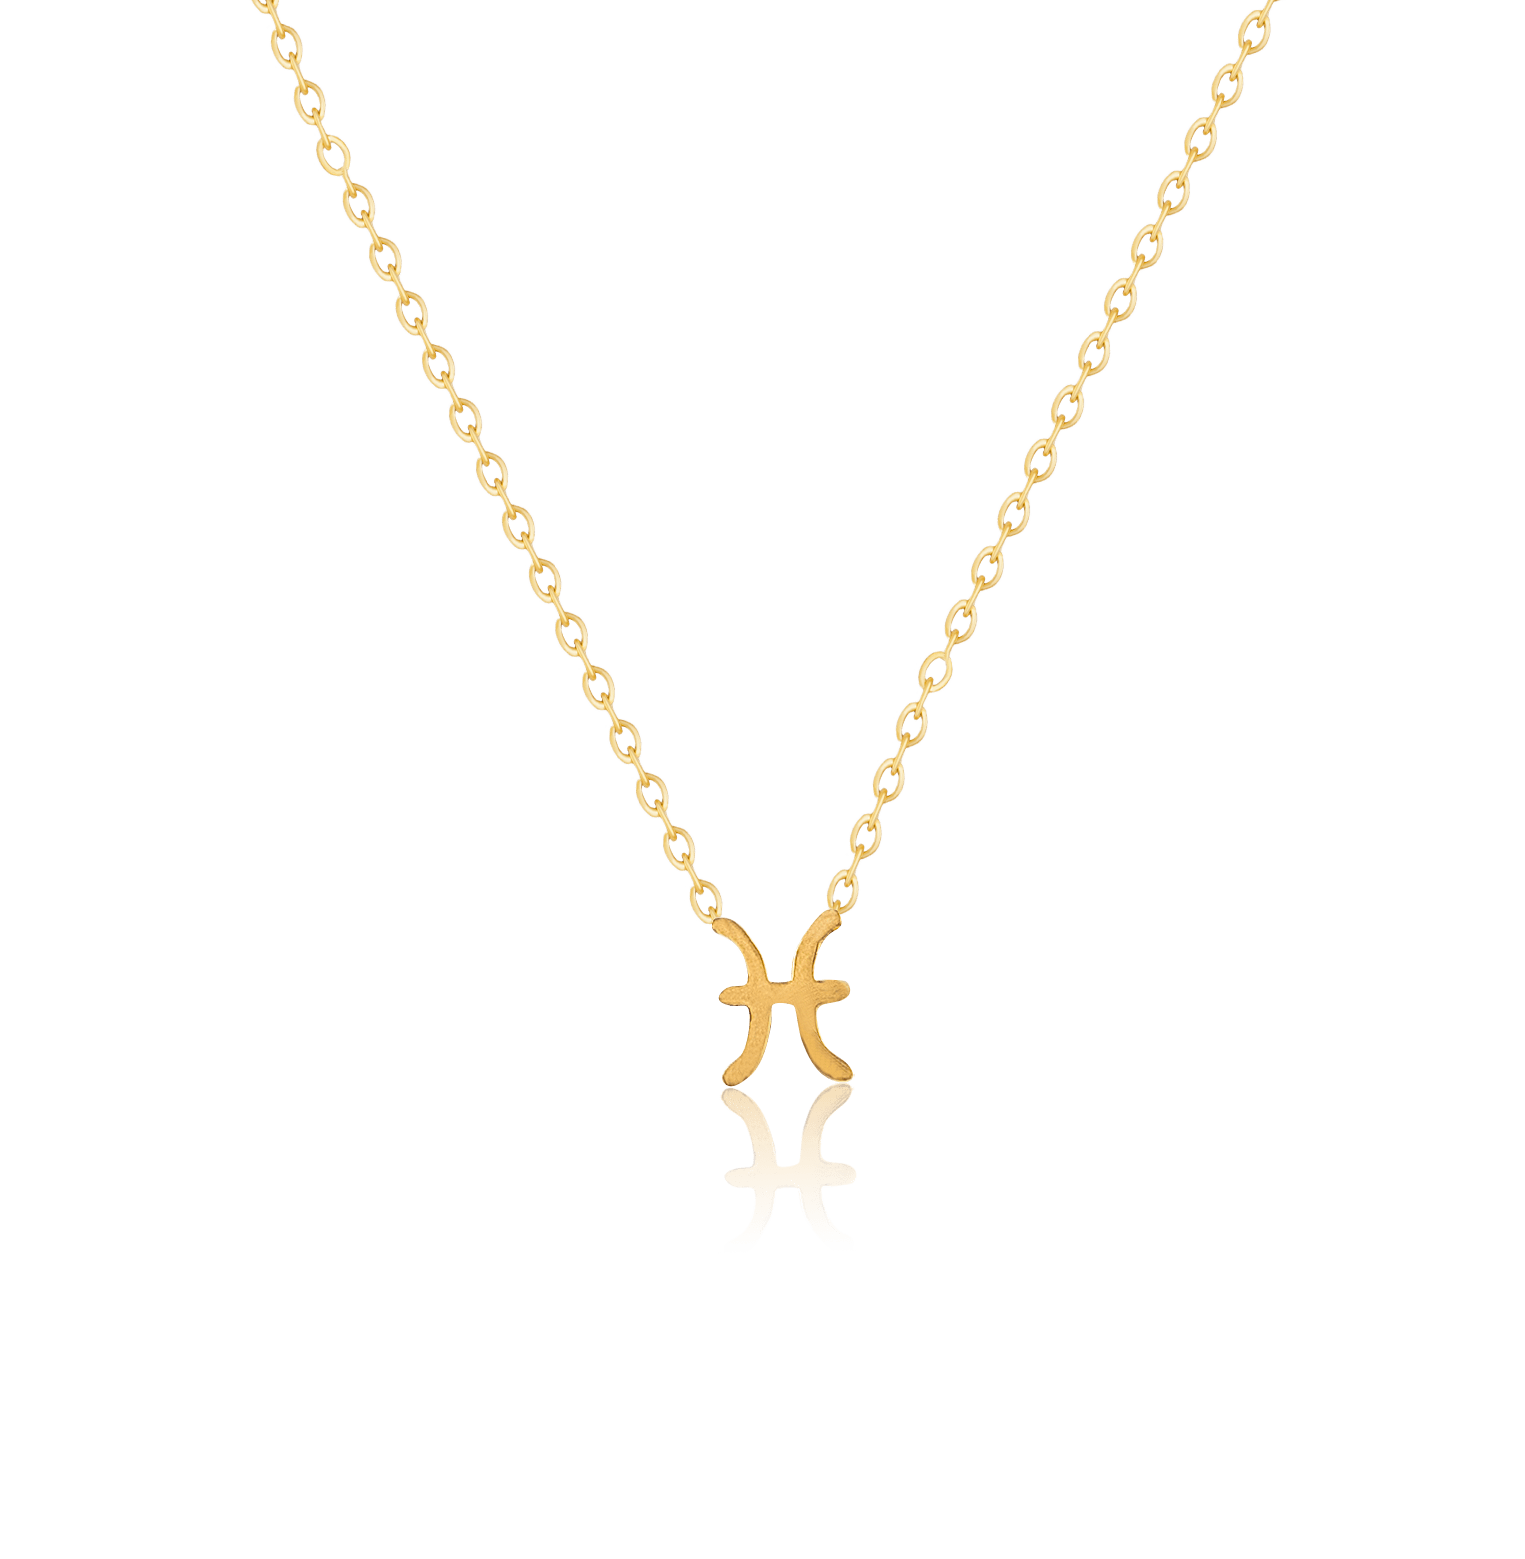 bianco rosso Necklaces Gold Pisces - Necklace cyprus greece jewelry gift free shipping europe worldwide